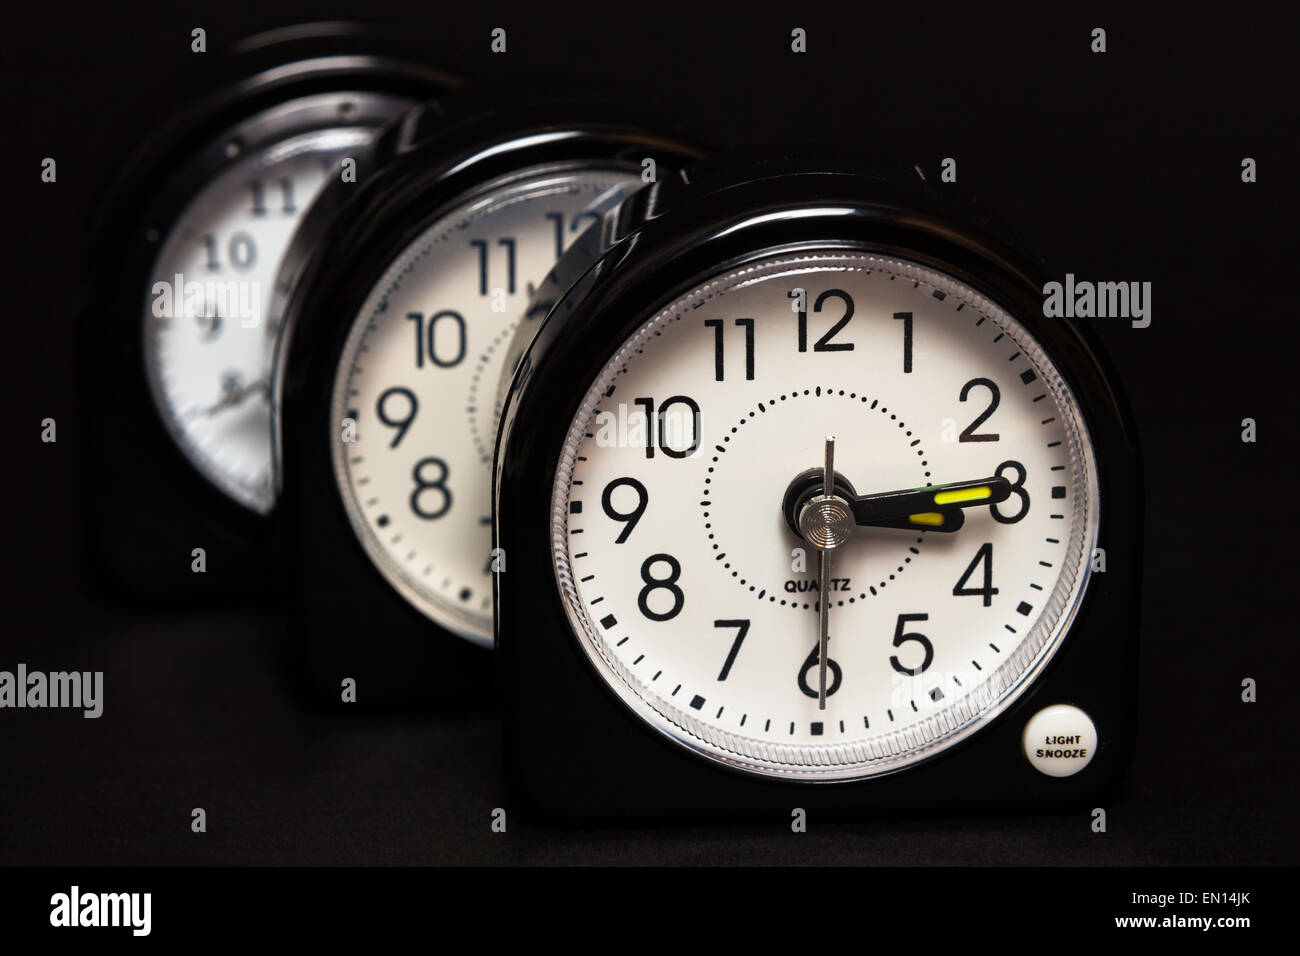 Three alarm clocks one behind the other with only front clock in focus Stock Photo